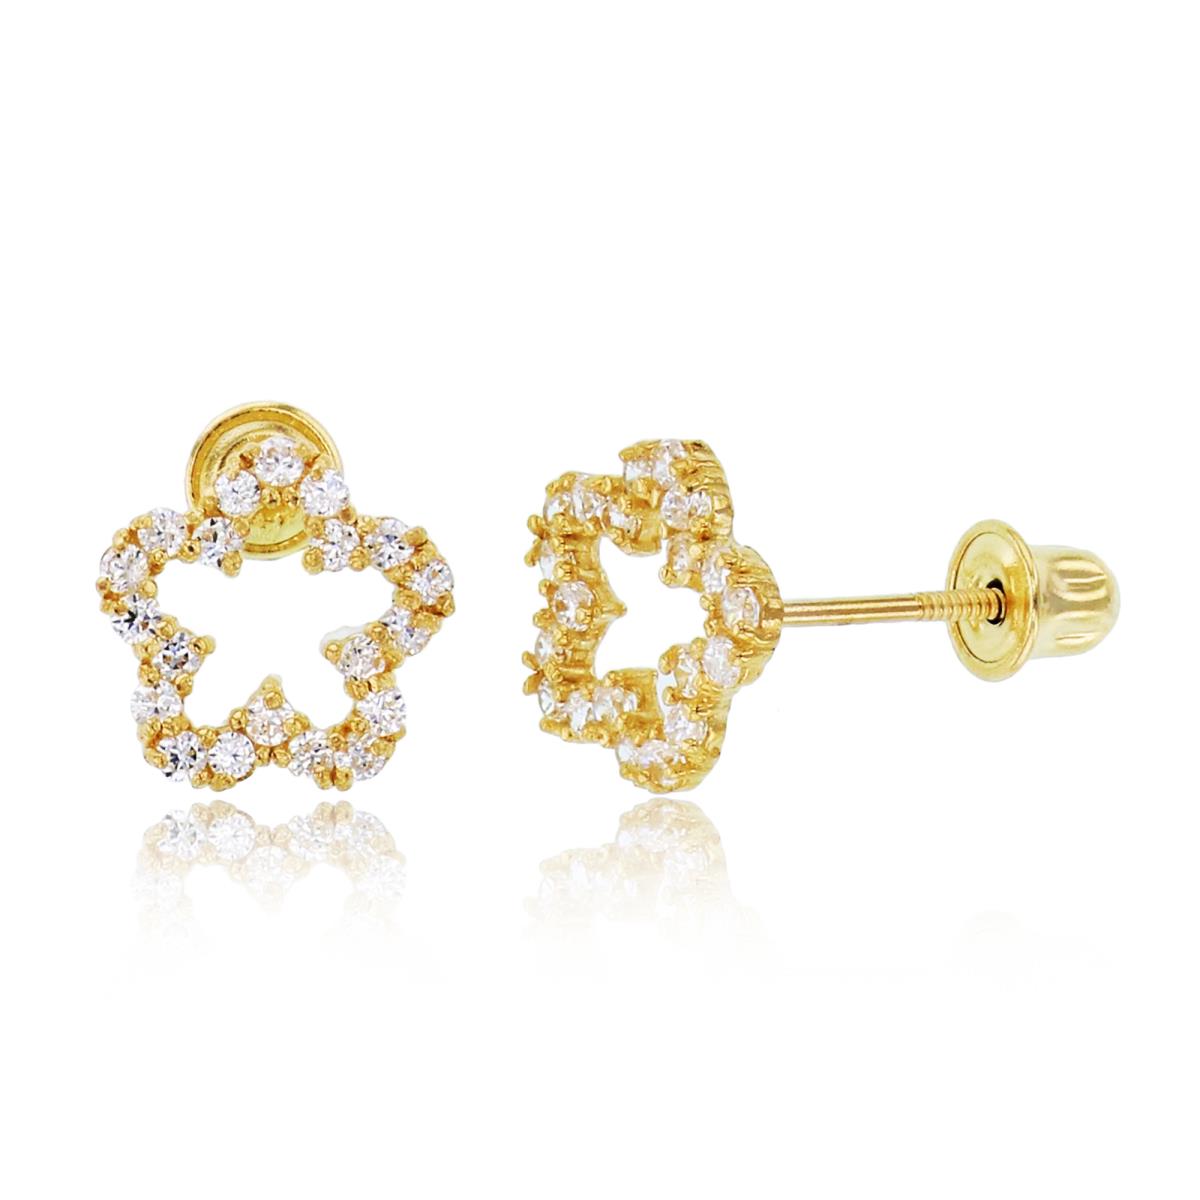 14K Yellow Gold Rnd CZ Micropave Open Flower Studs with Screw Backs